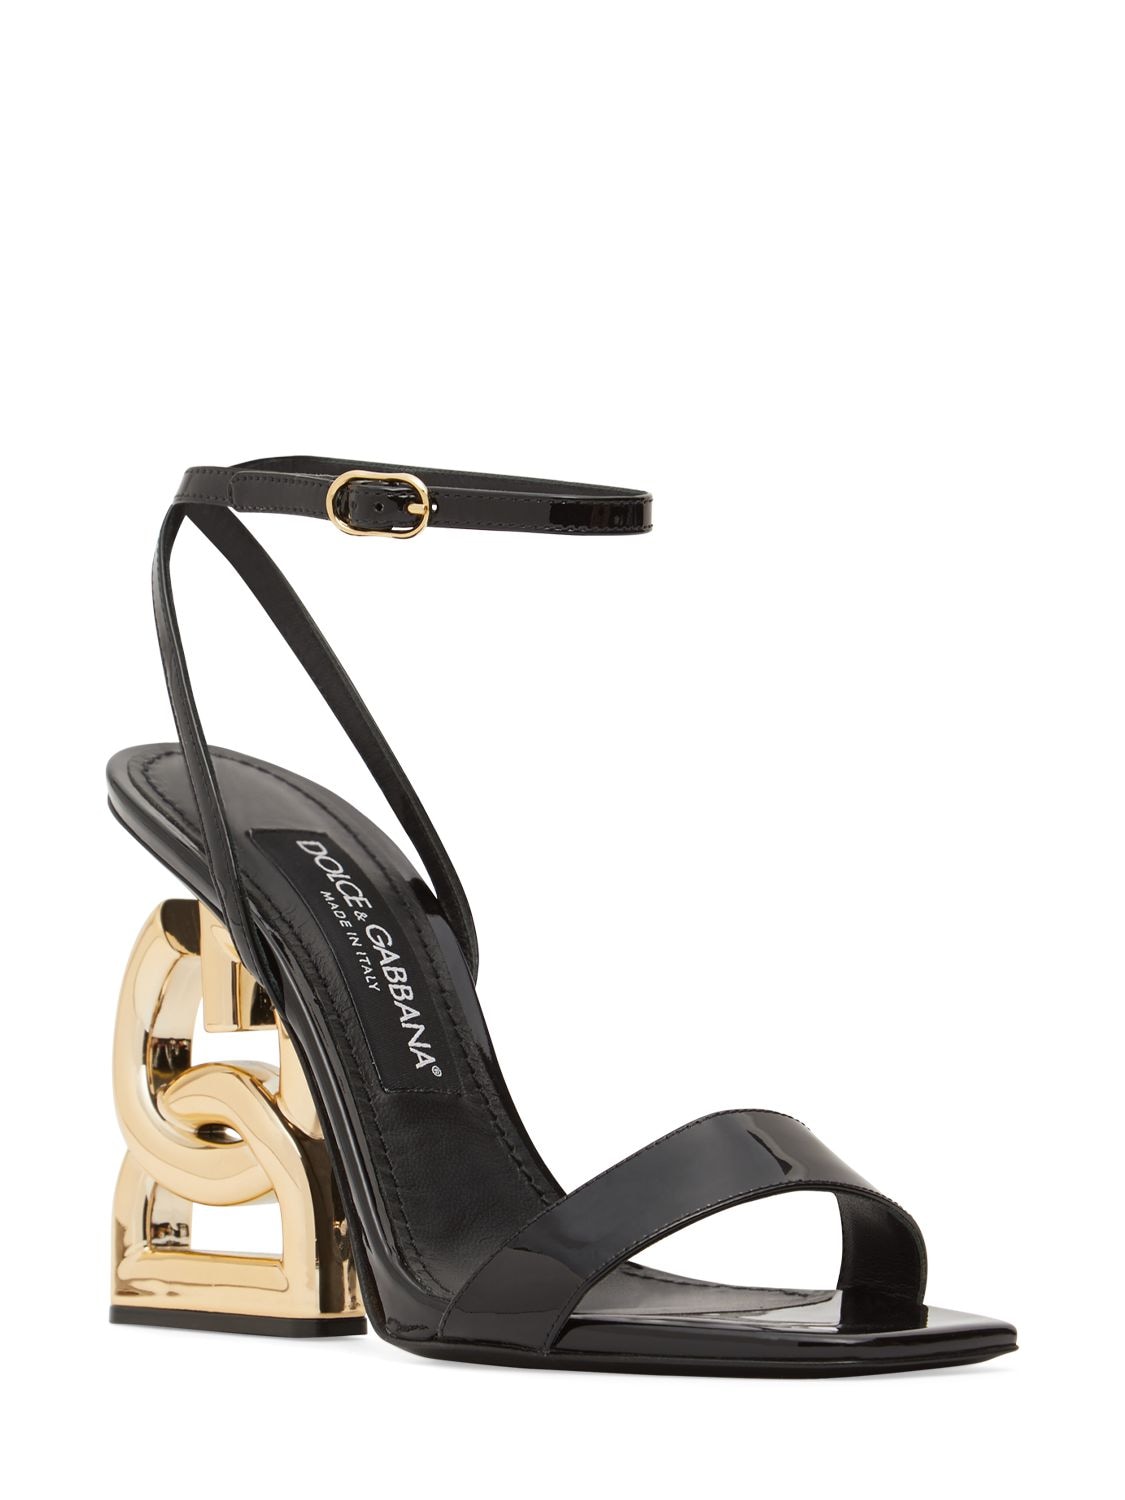 Shop Dolce & Gabbana 105mm Keira Patent Leather Sandals In Black